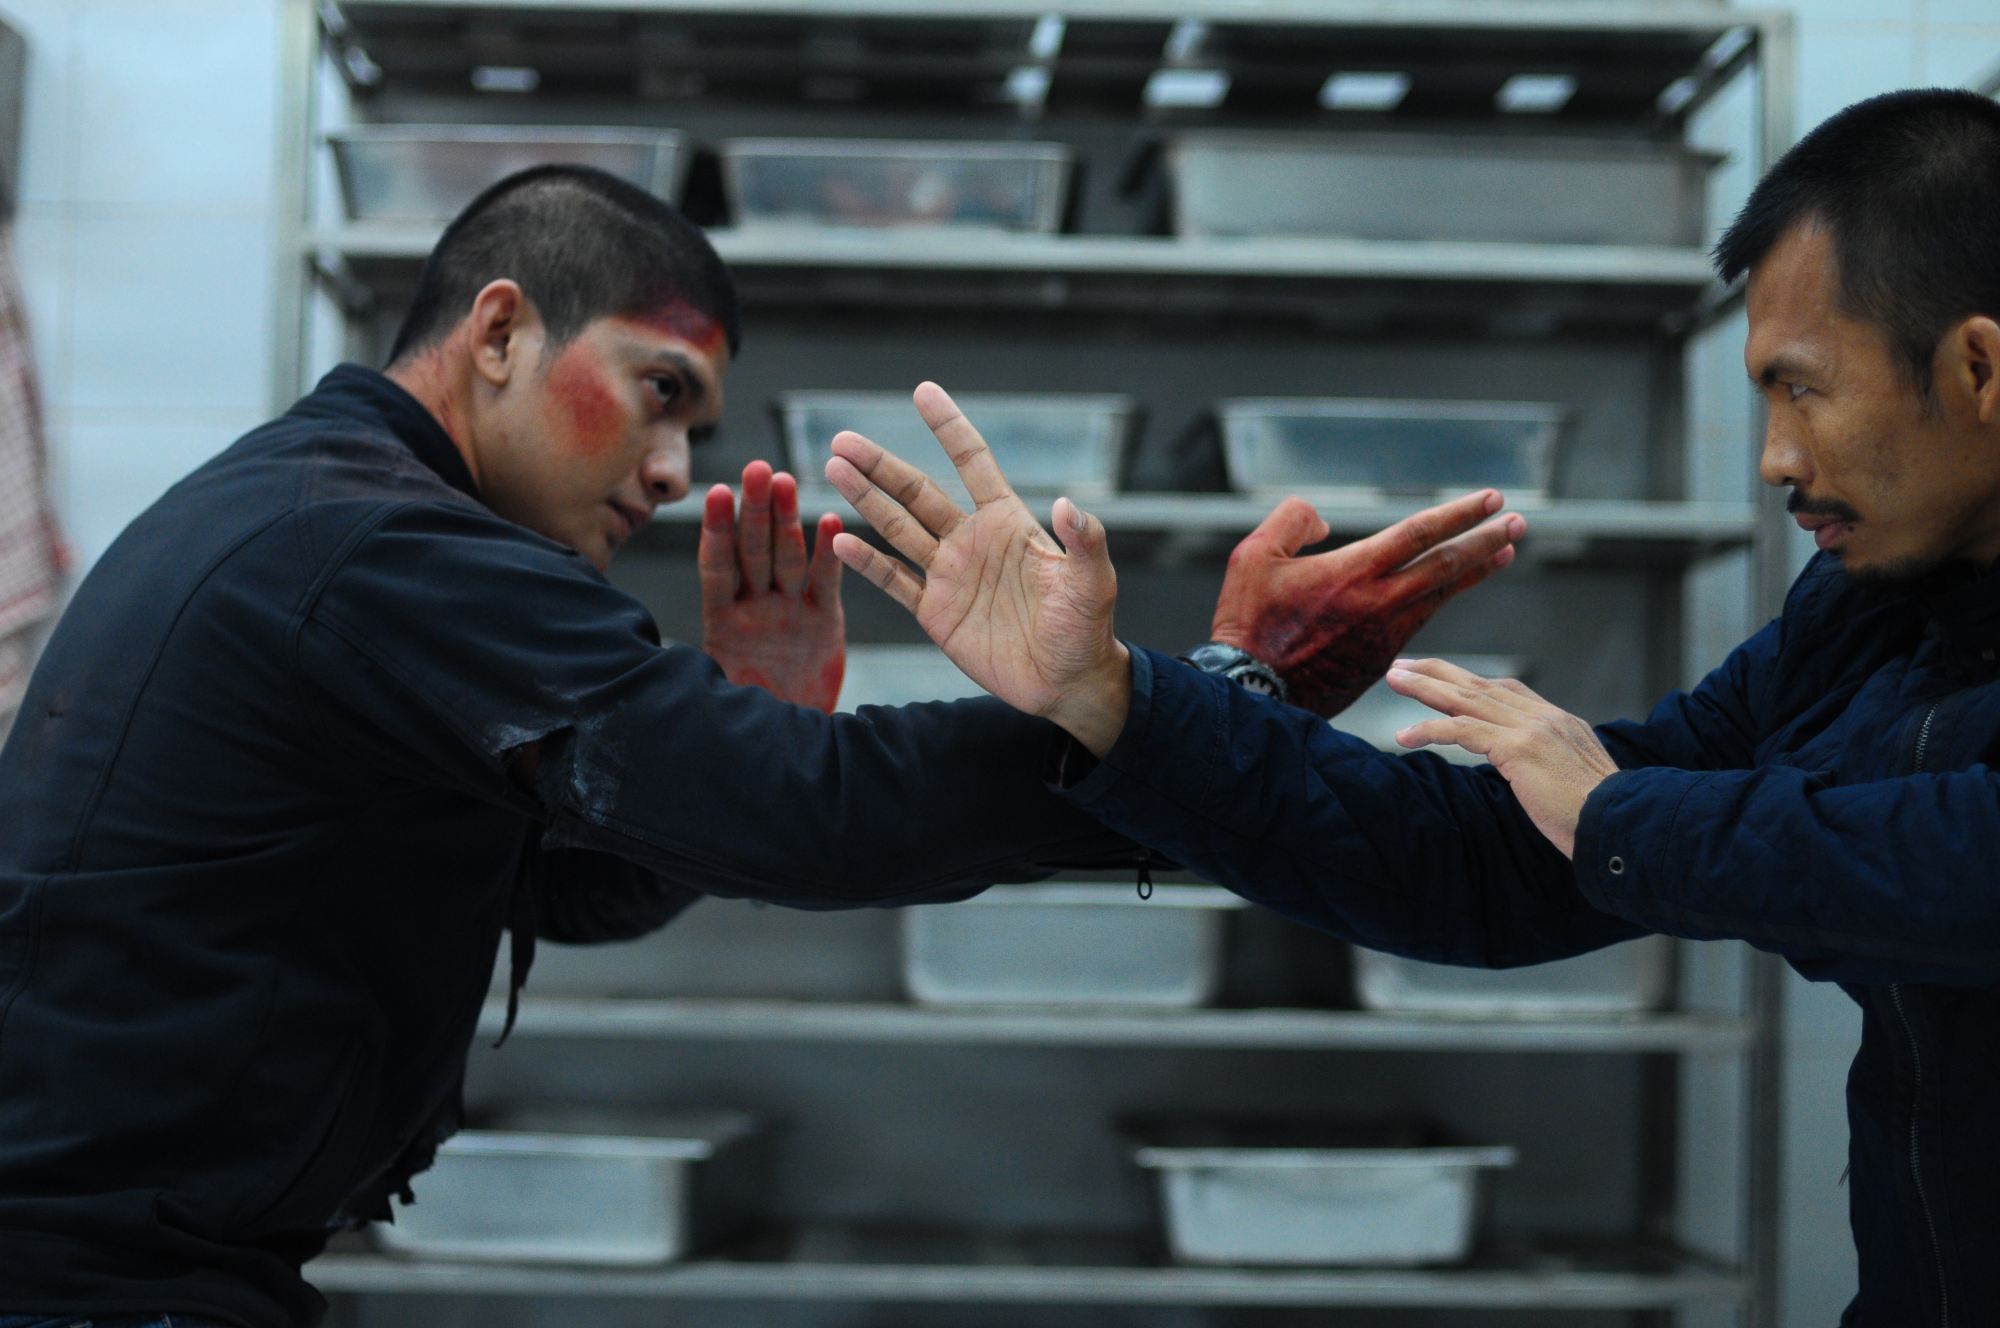 'The Raid 2' Iko Uwais as Rama and Cecep Arif Rahman as The Assassin holding their hands out in a fighting position, standing close to one another.